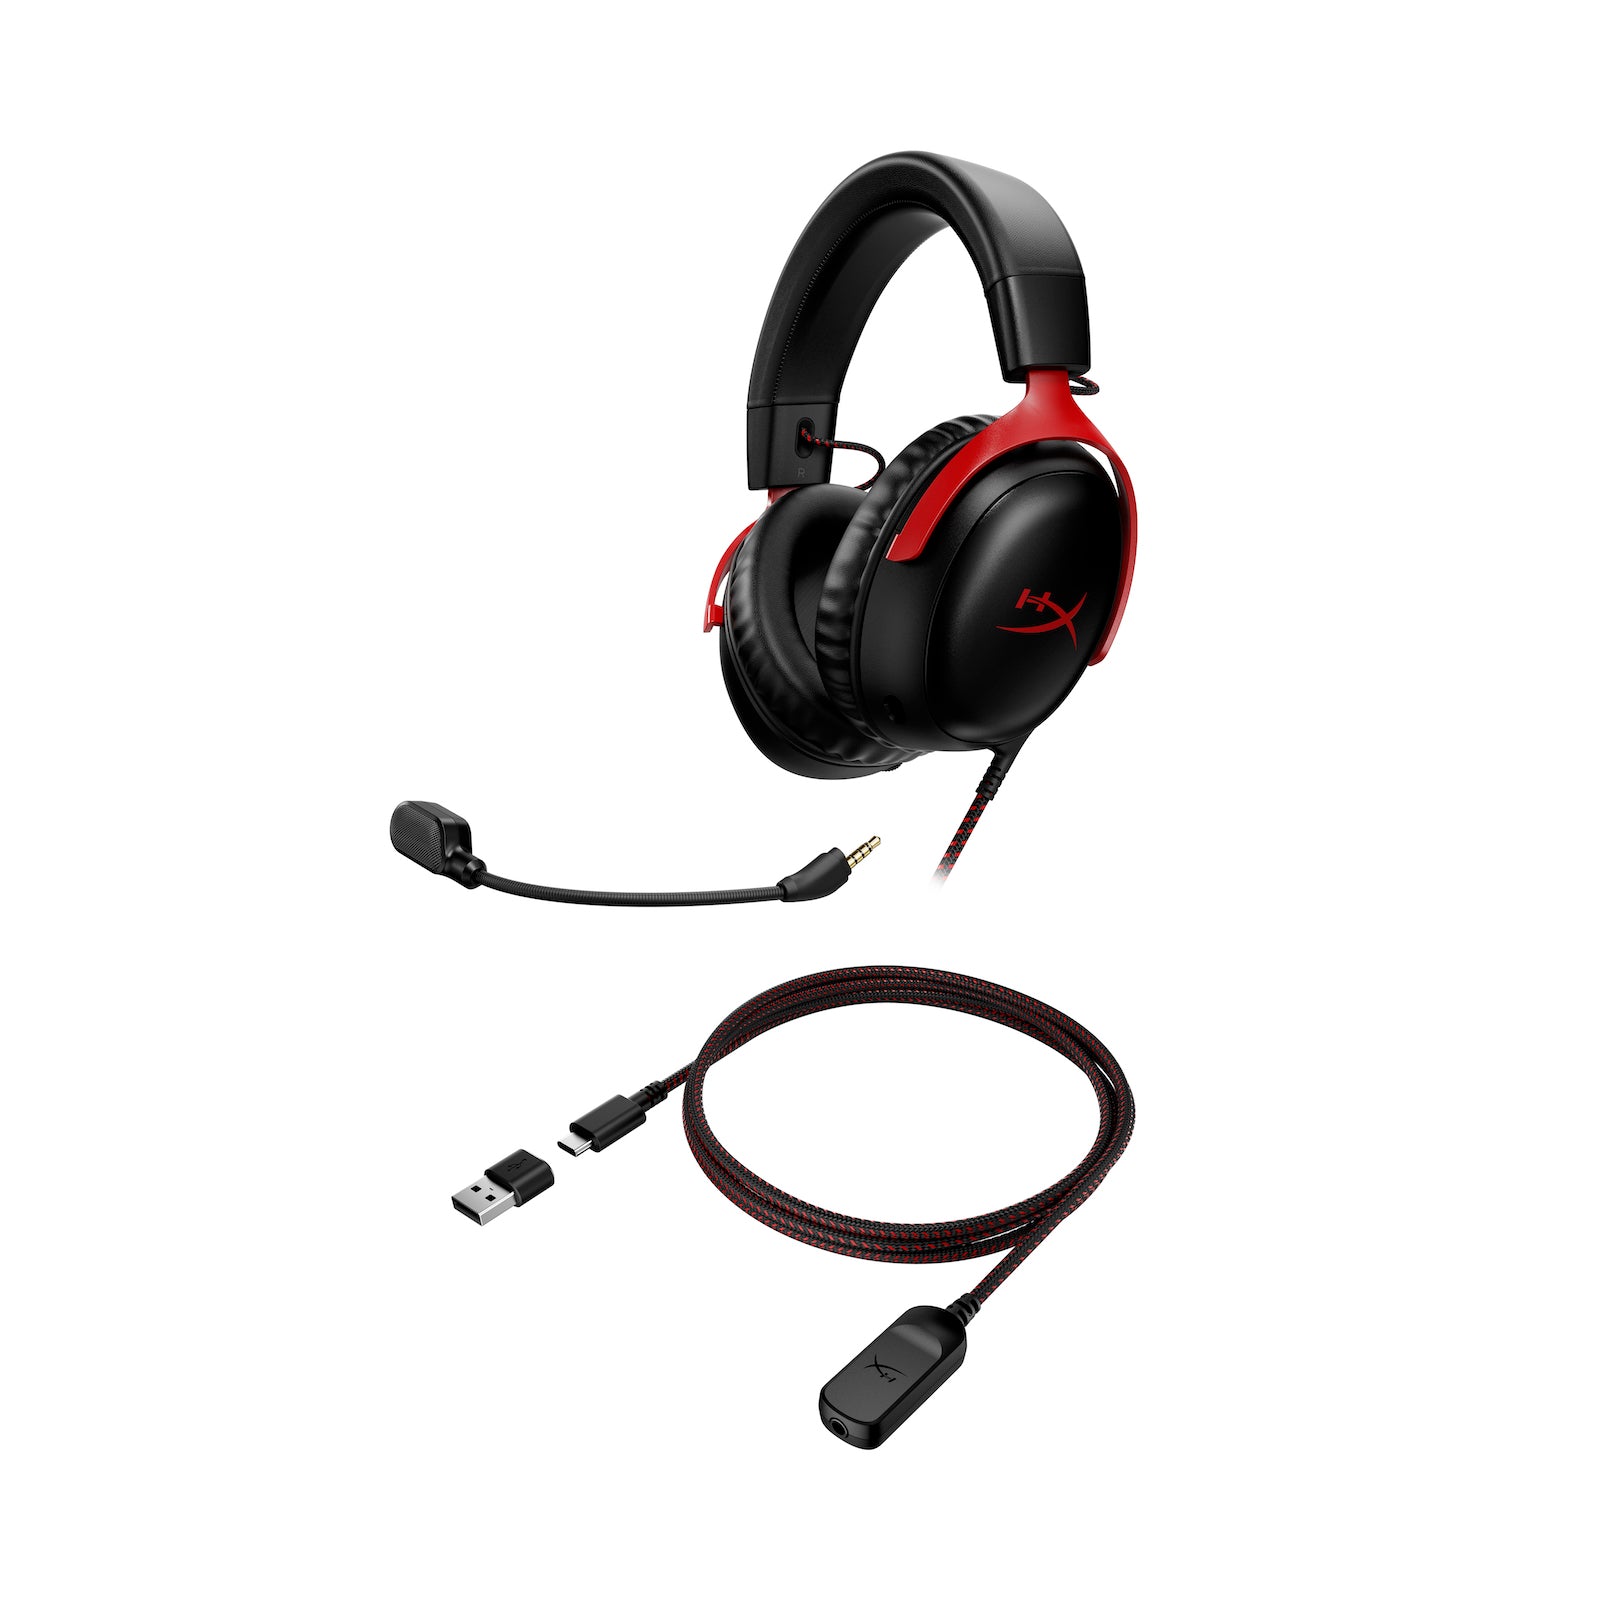 HyperX Cloud III Wired Gaming Headset Review